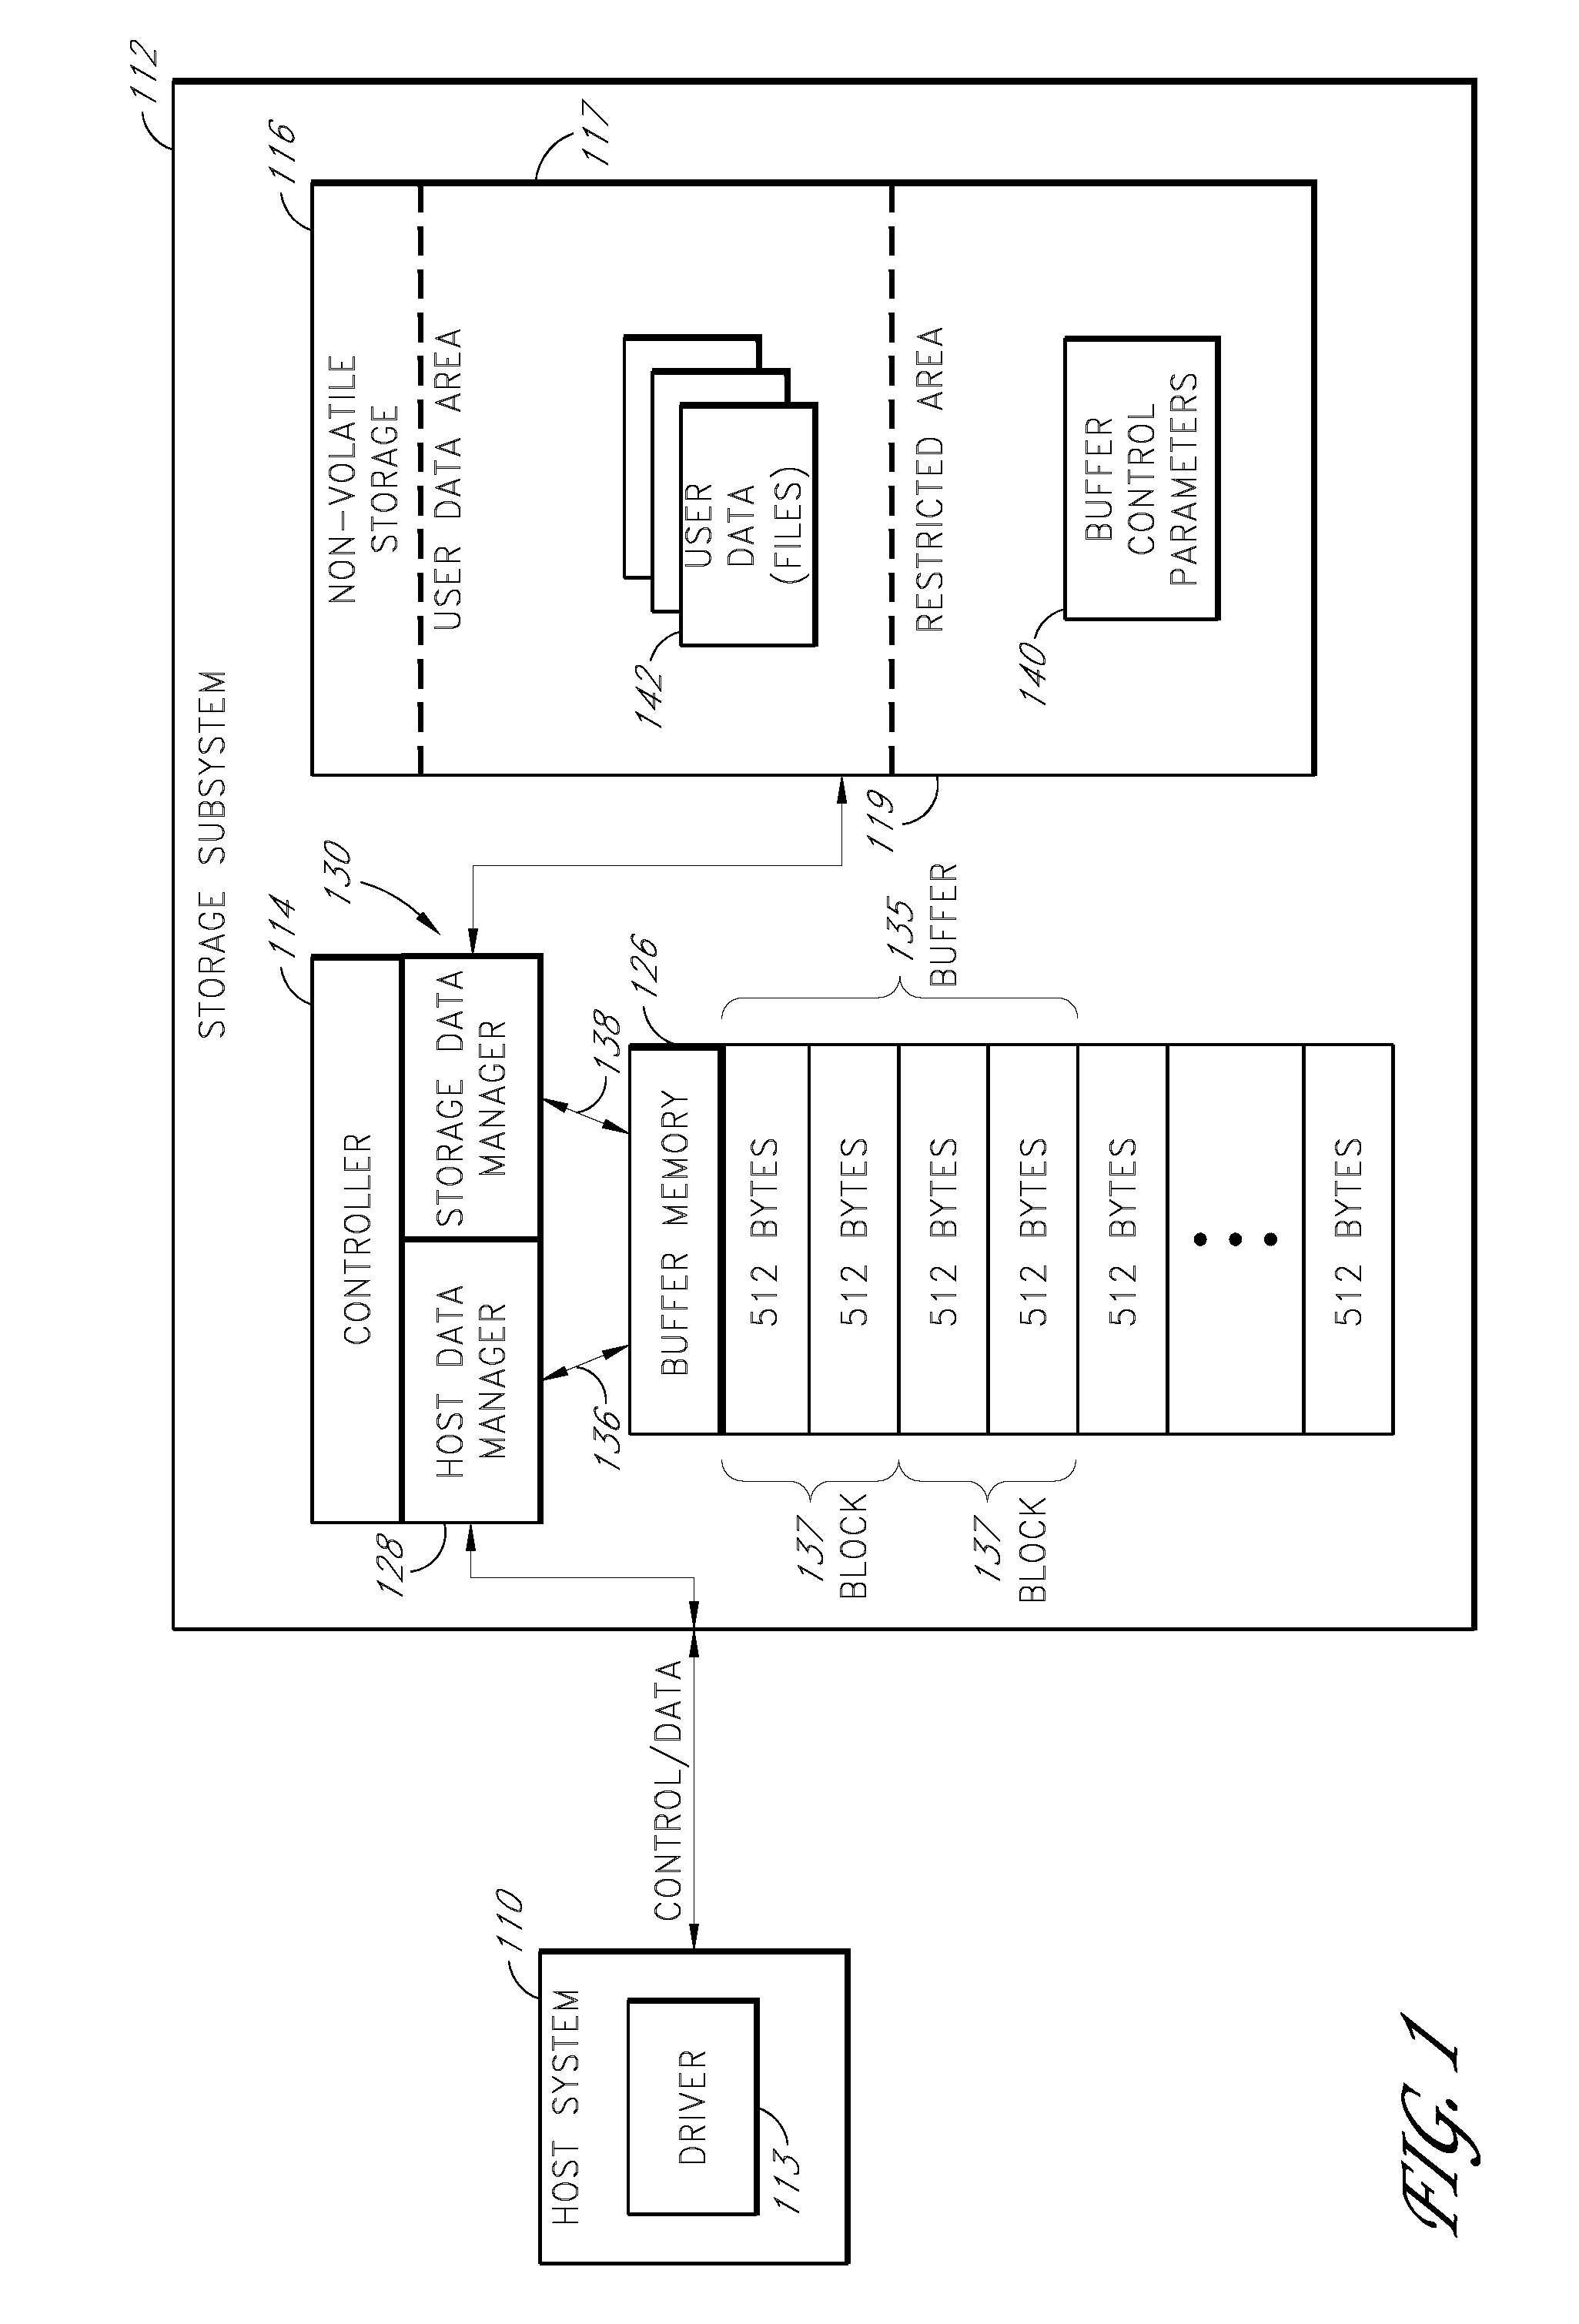 Storage subsystem with configurable buffer